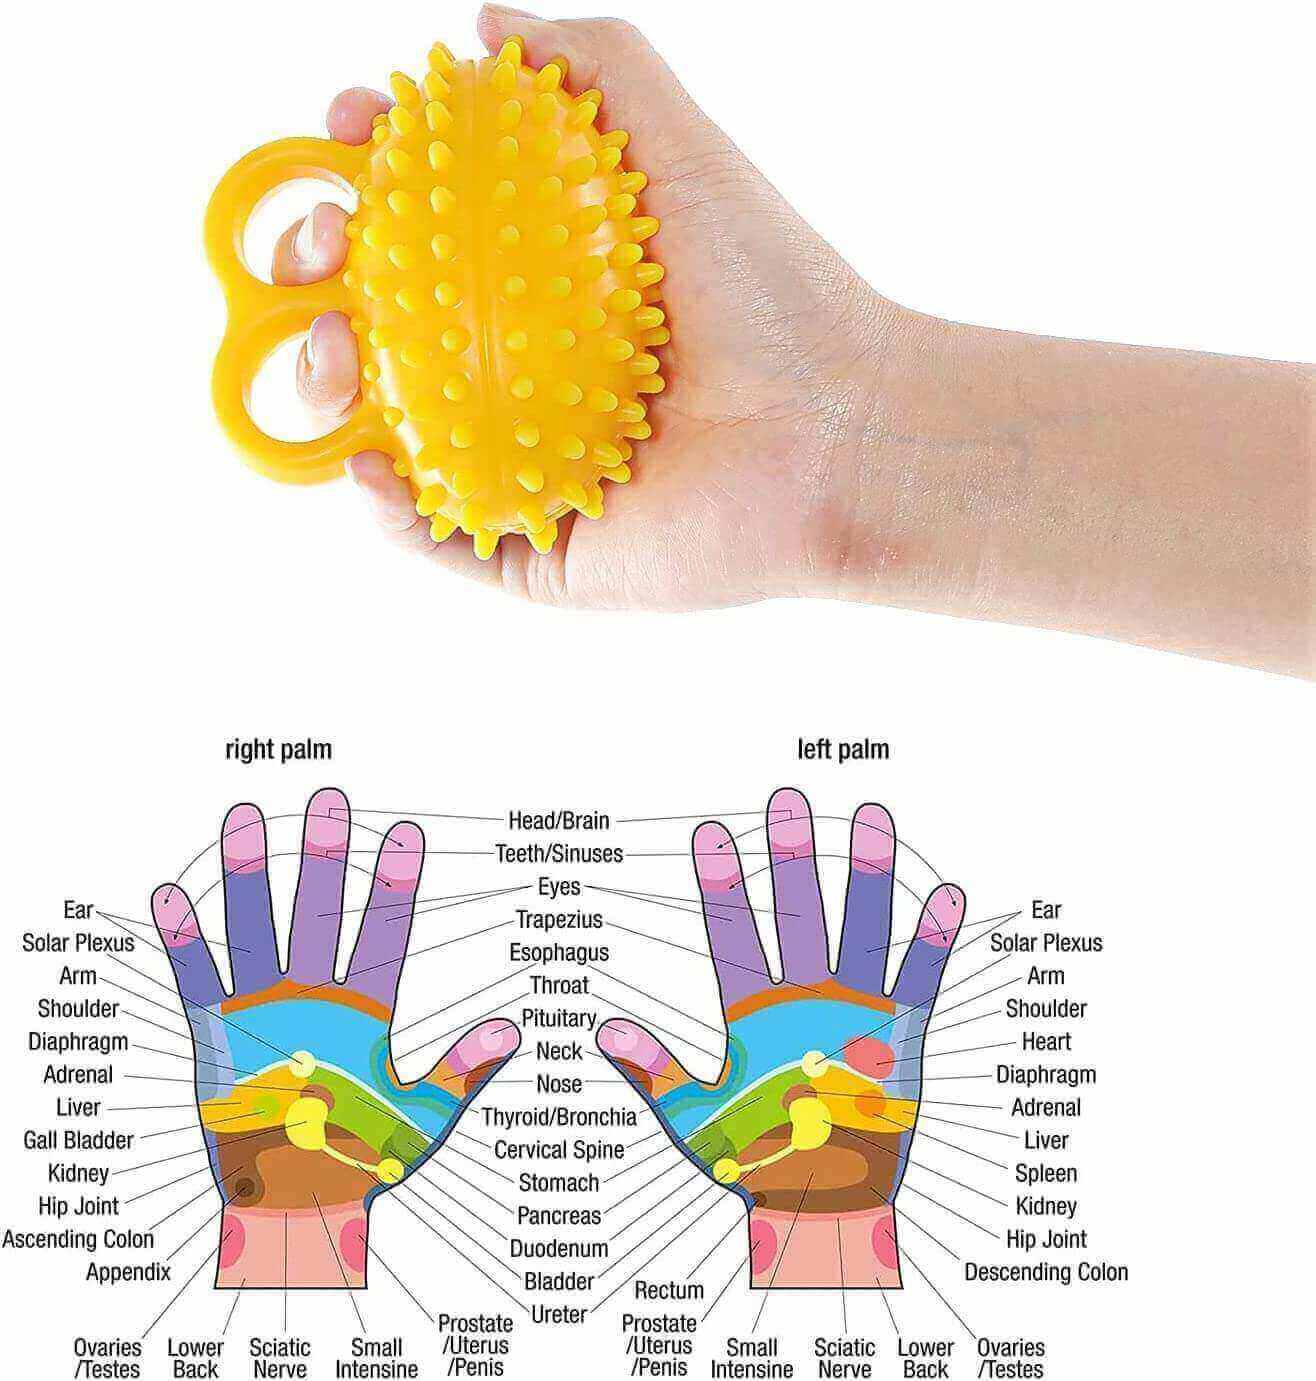 Spiky massage ball for hand and finger exercises, acupoints and responding body organs